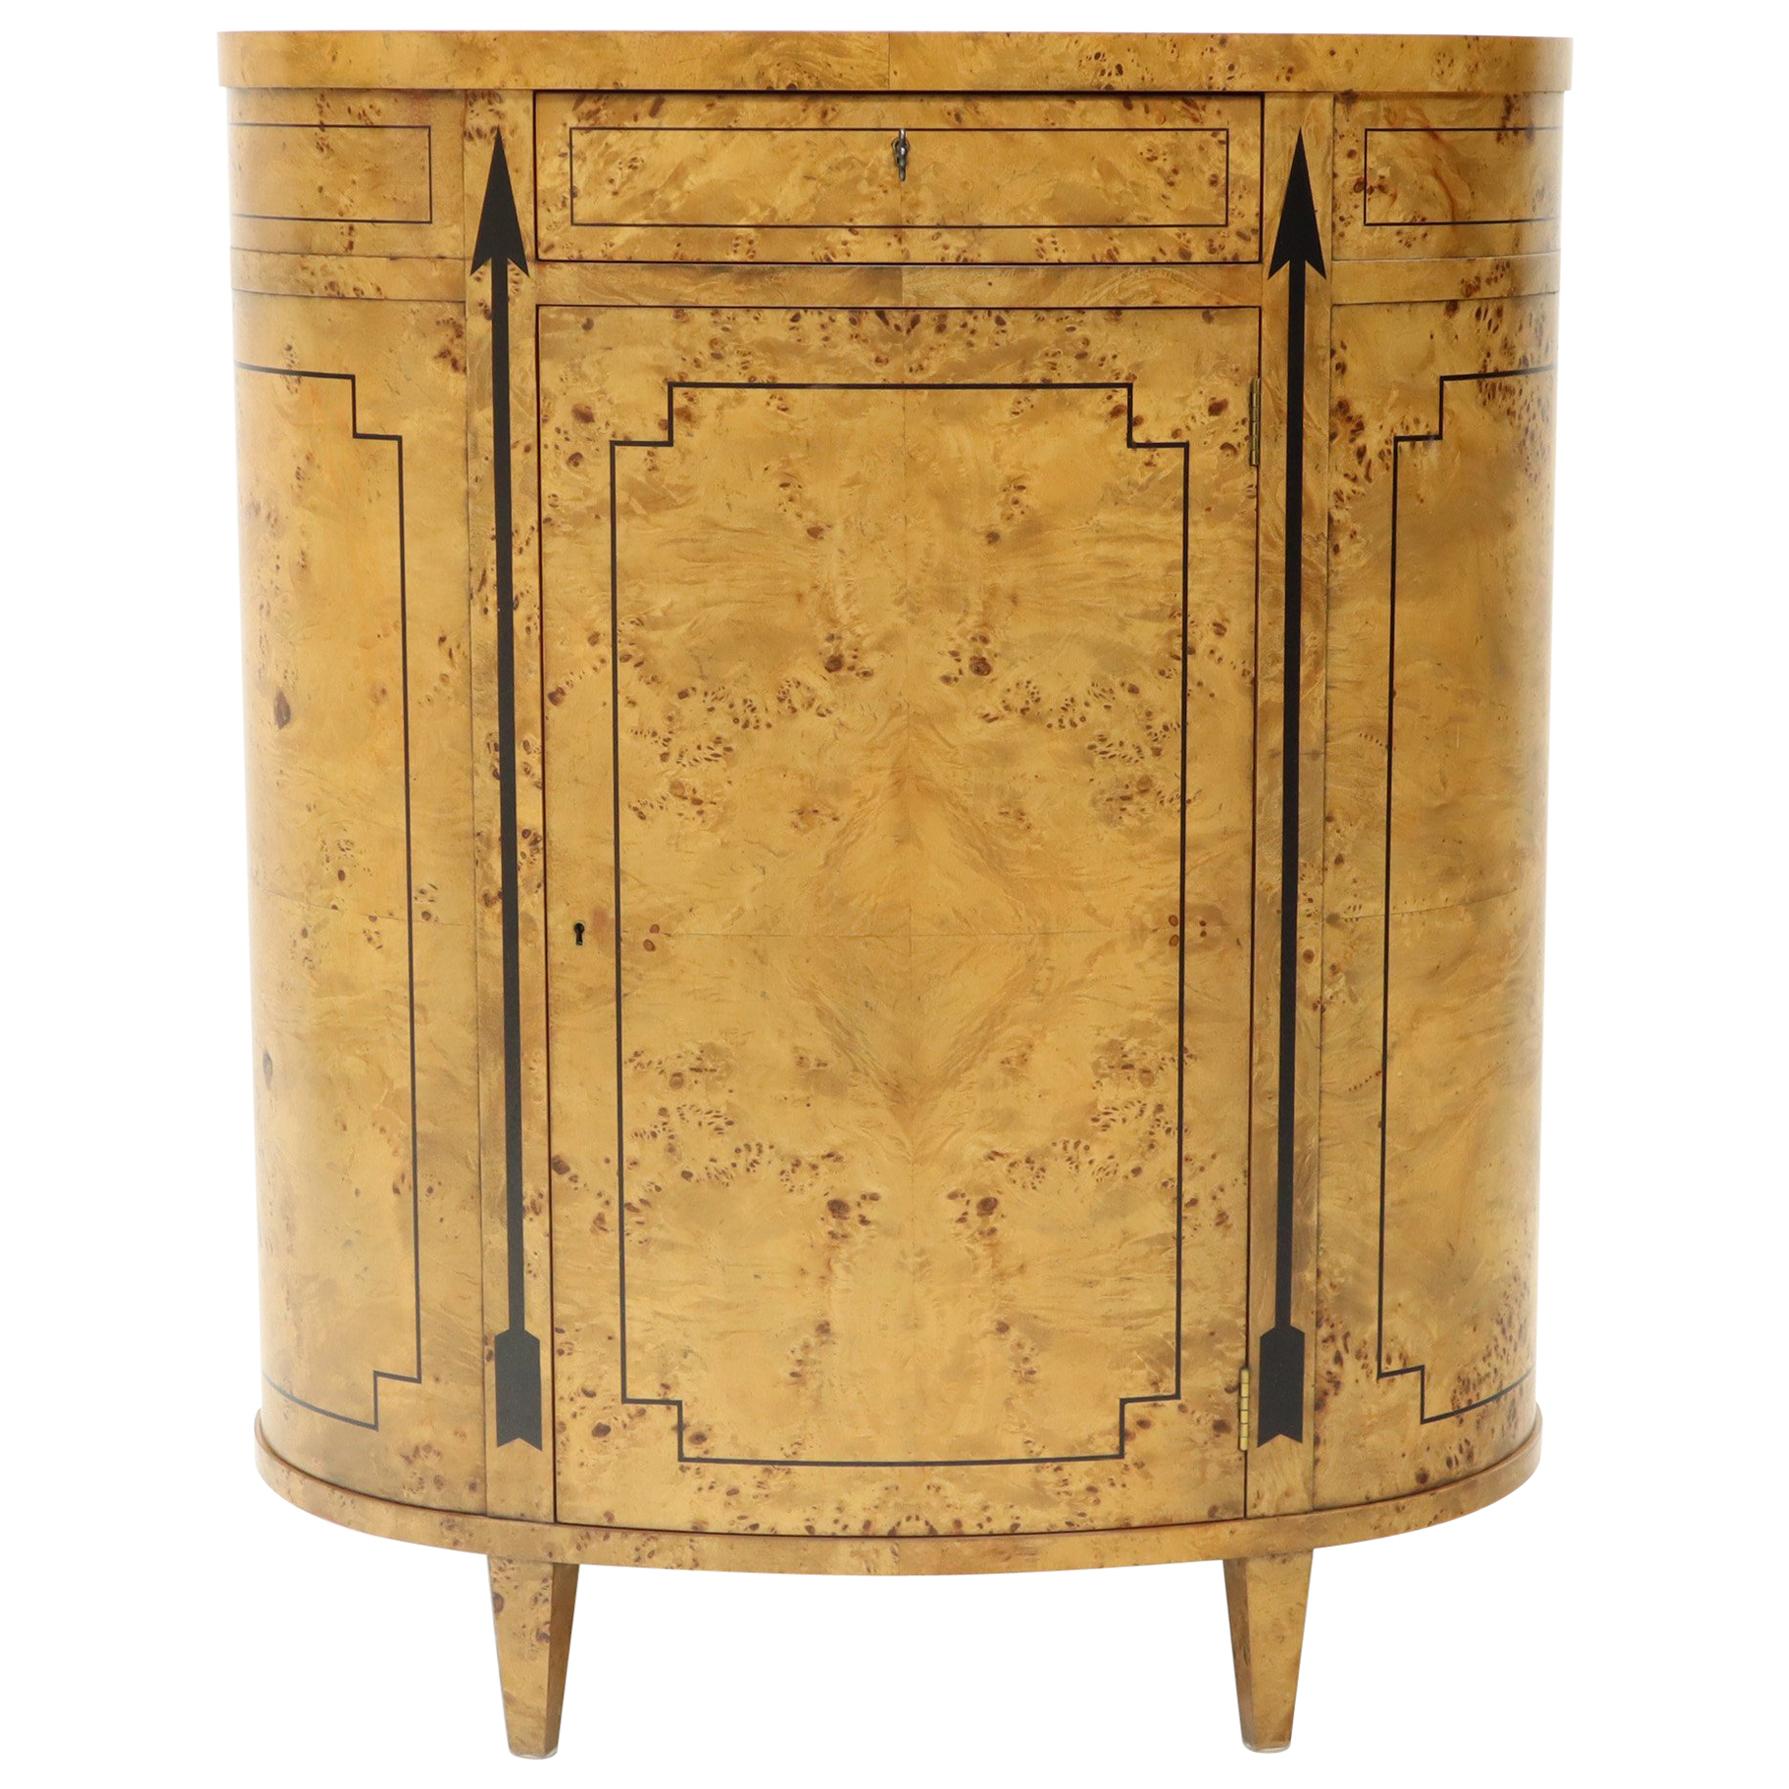 Biedermeier or neoclassical style oval round cylinder shape burl wood liquor cabinet utility chest storage. Finished back makes it a good looking centrepiece. Nice black accent arrows pointing upwards.